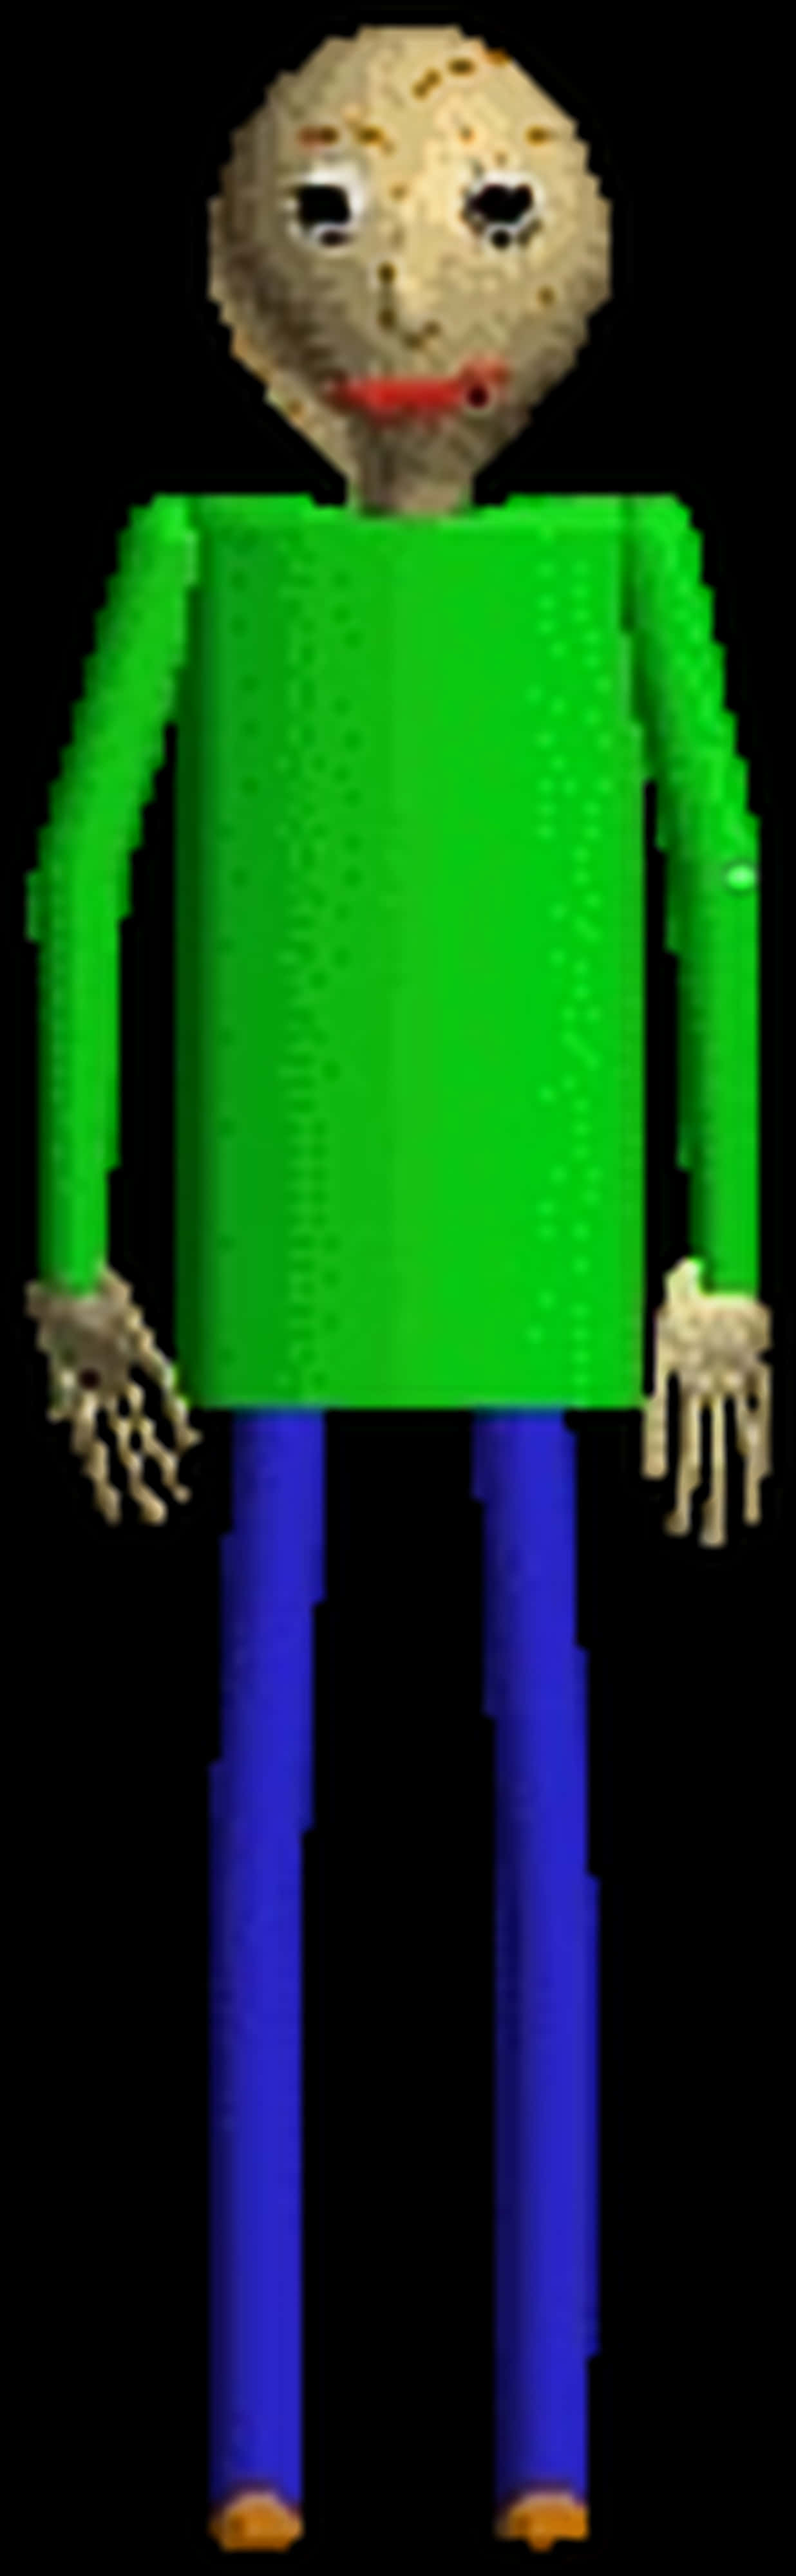 A Green Shirt With Blue Pants And Hands